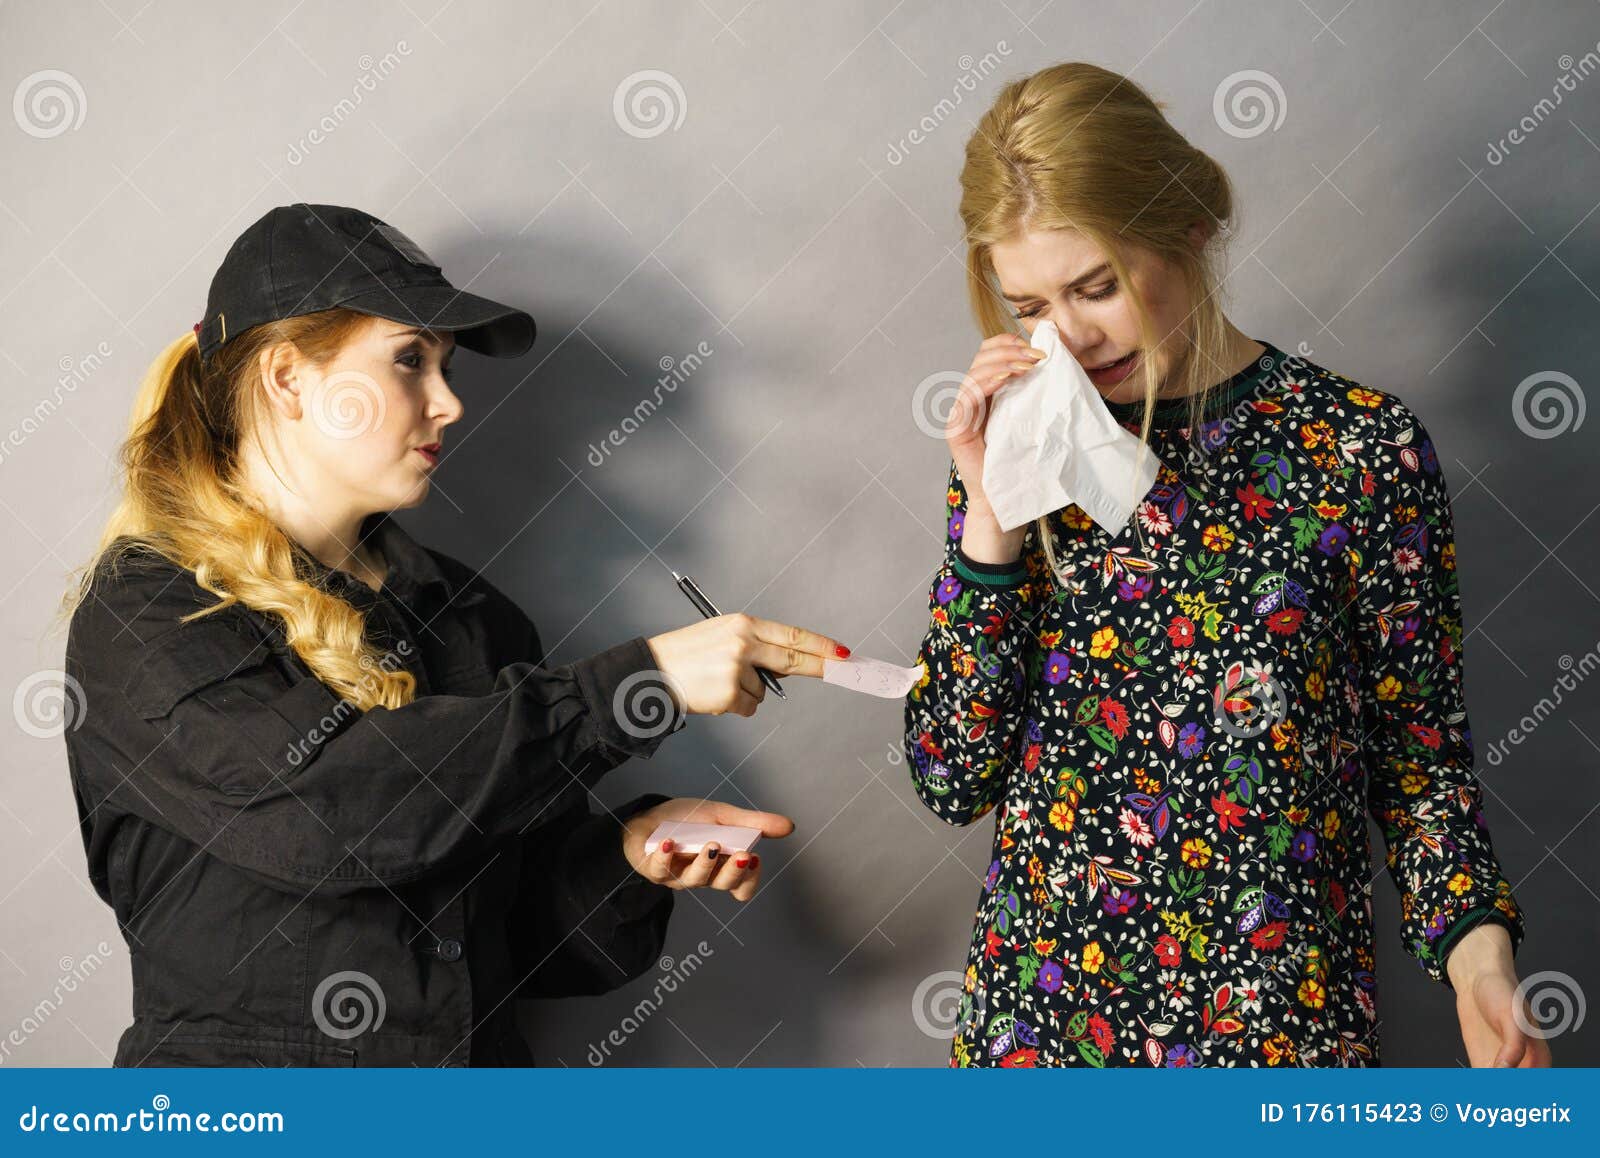 Security Guard And Shoplifter Stock Image Image Of Girl Police